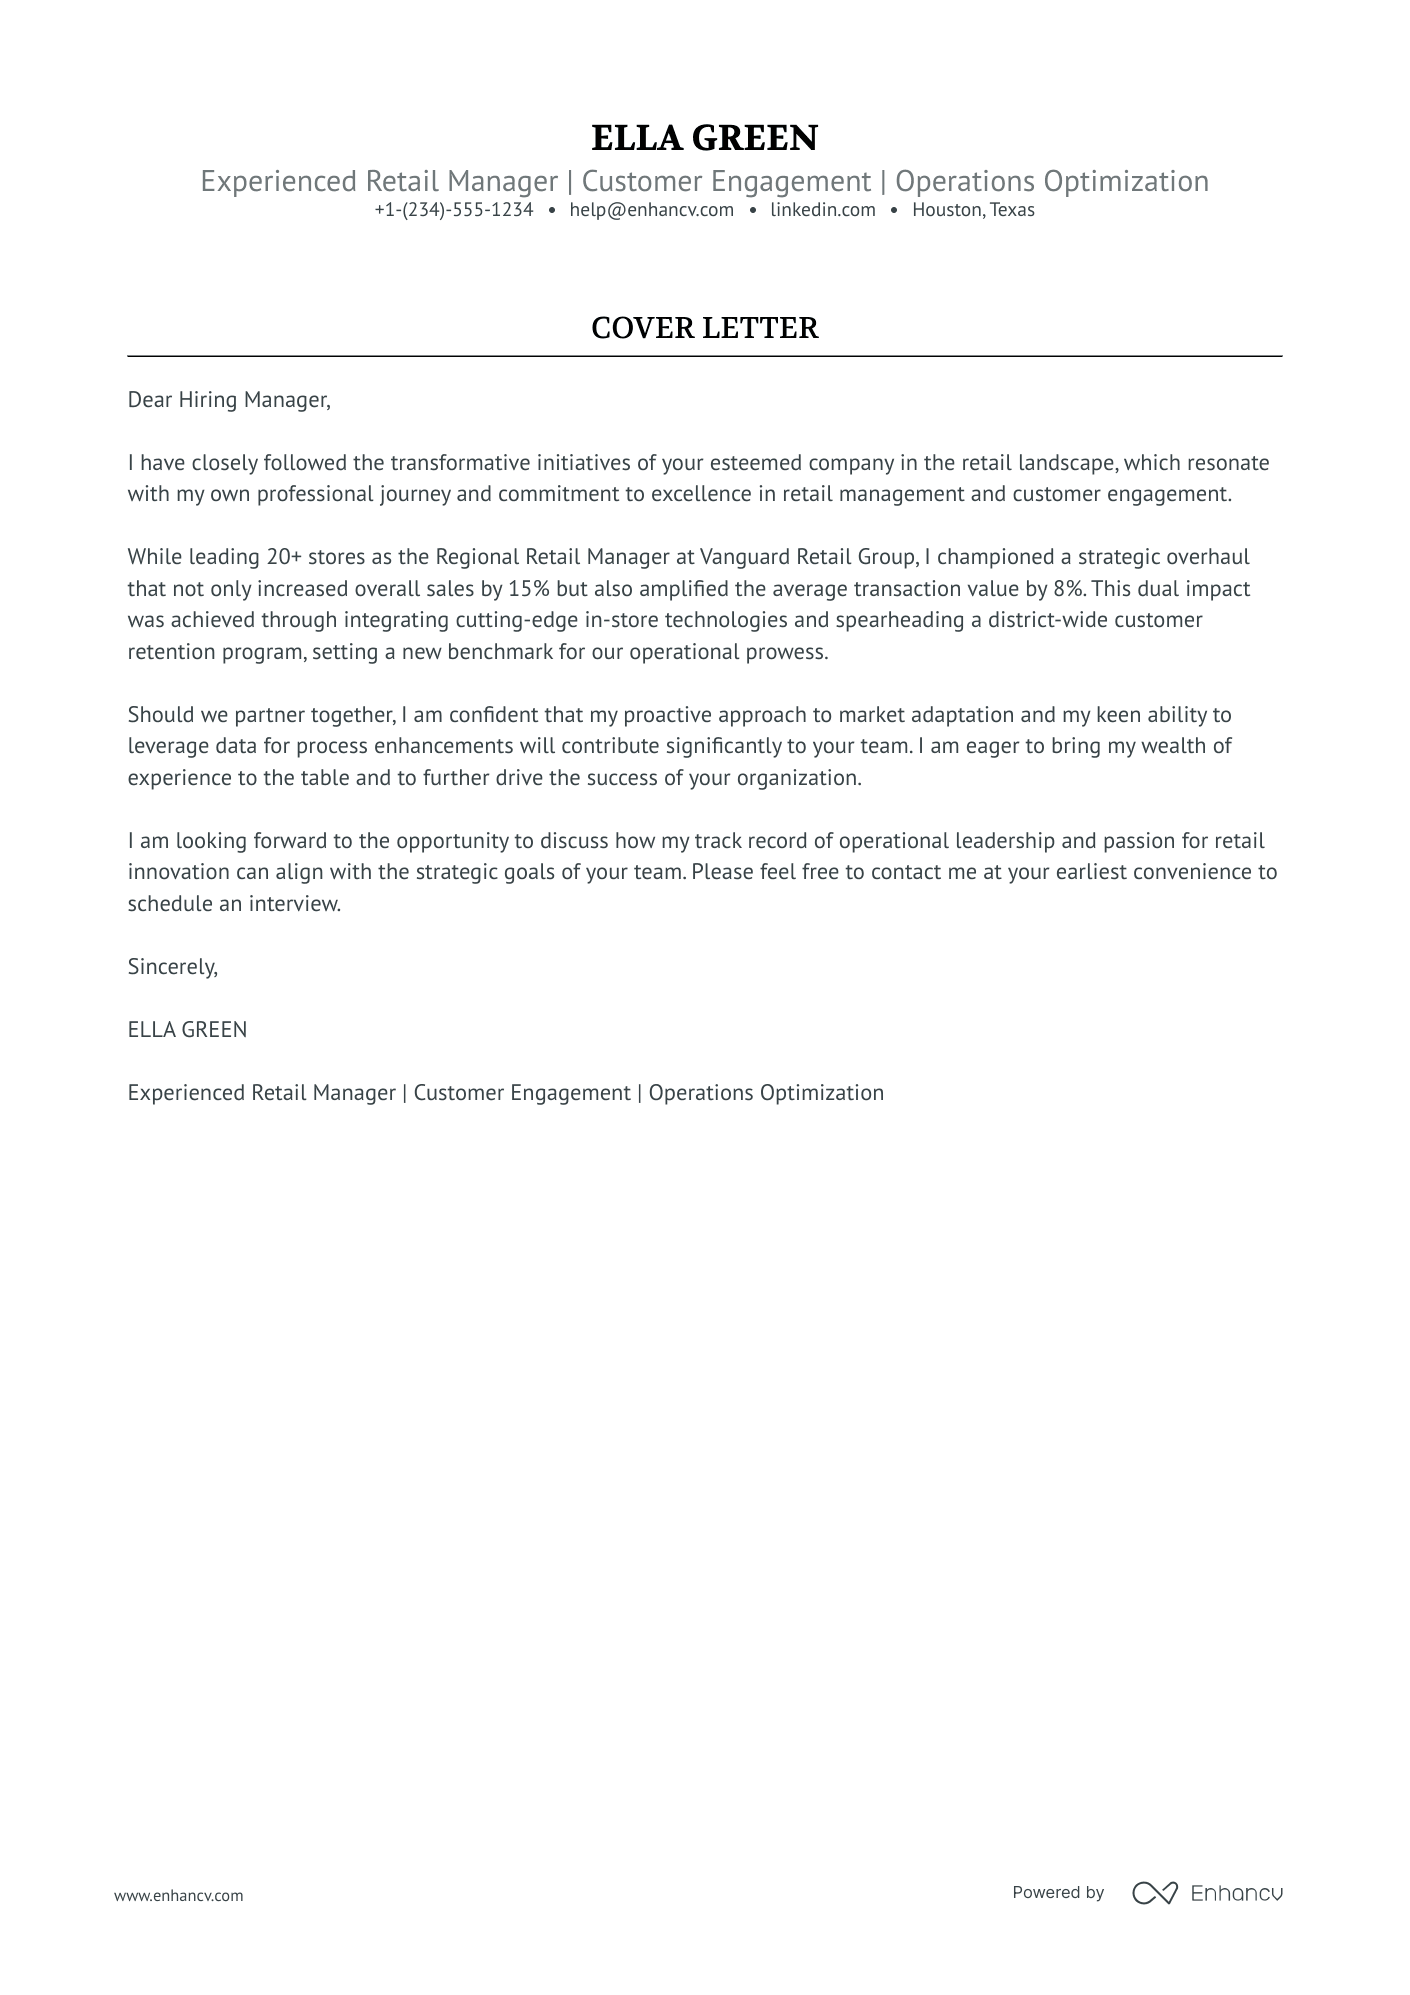 Retail Director cover letter